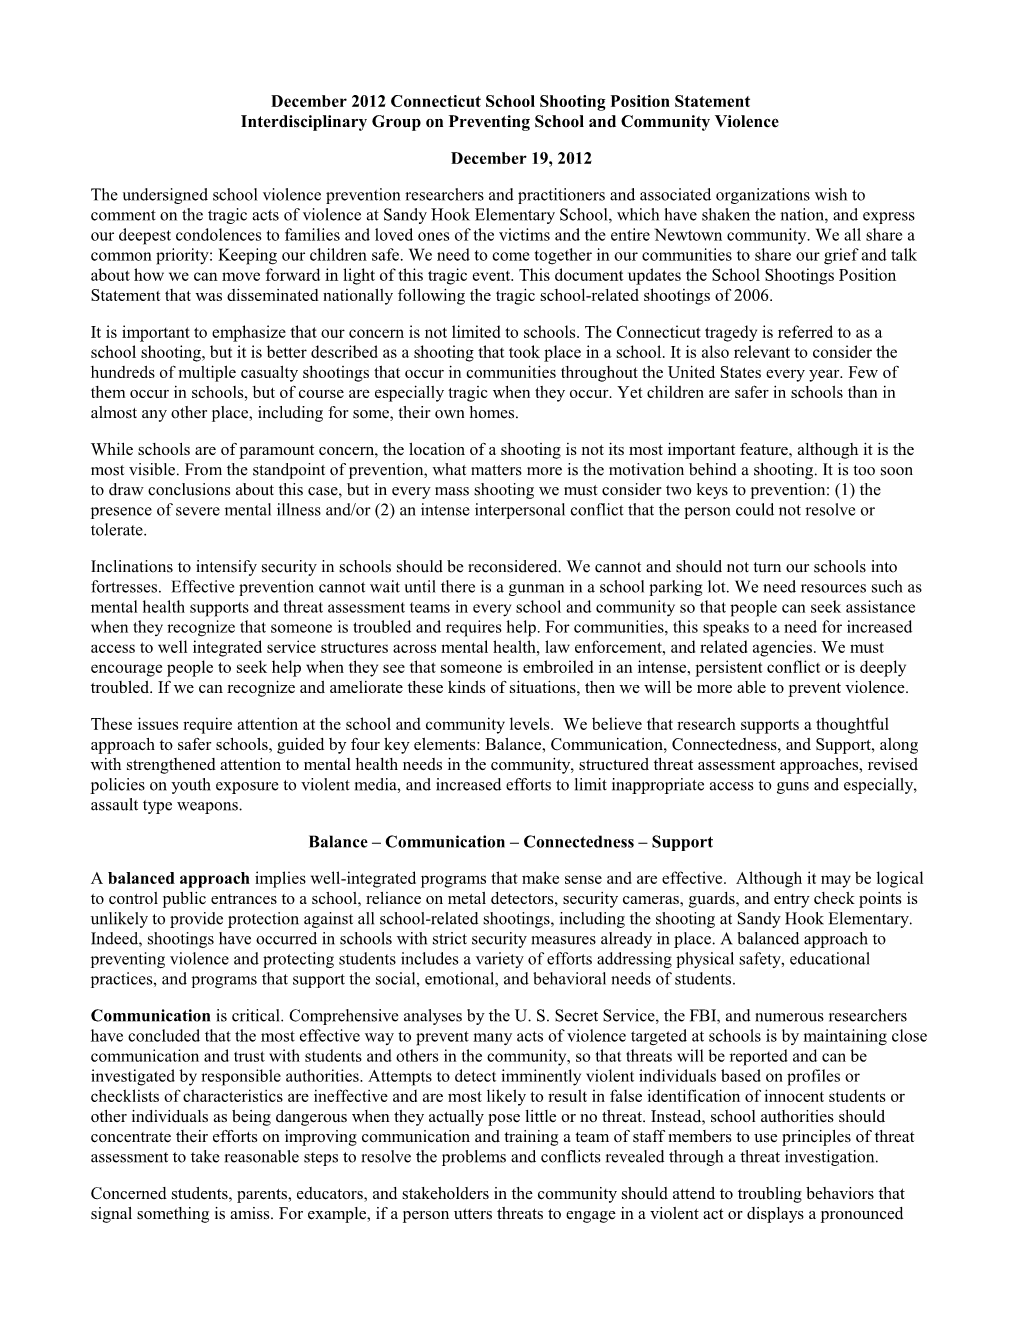 December 2012 Connecticut School Shooting Position Statement Interdisciplinary Group on Preventing School and Community Violence